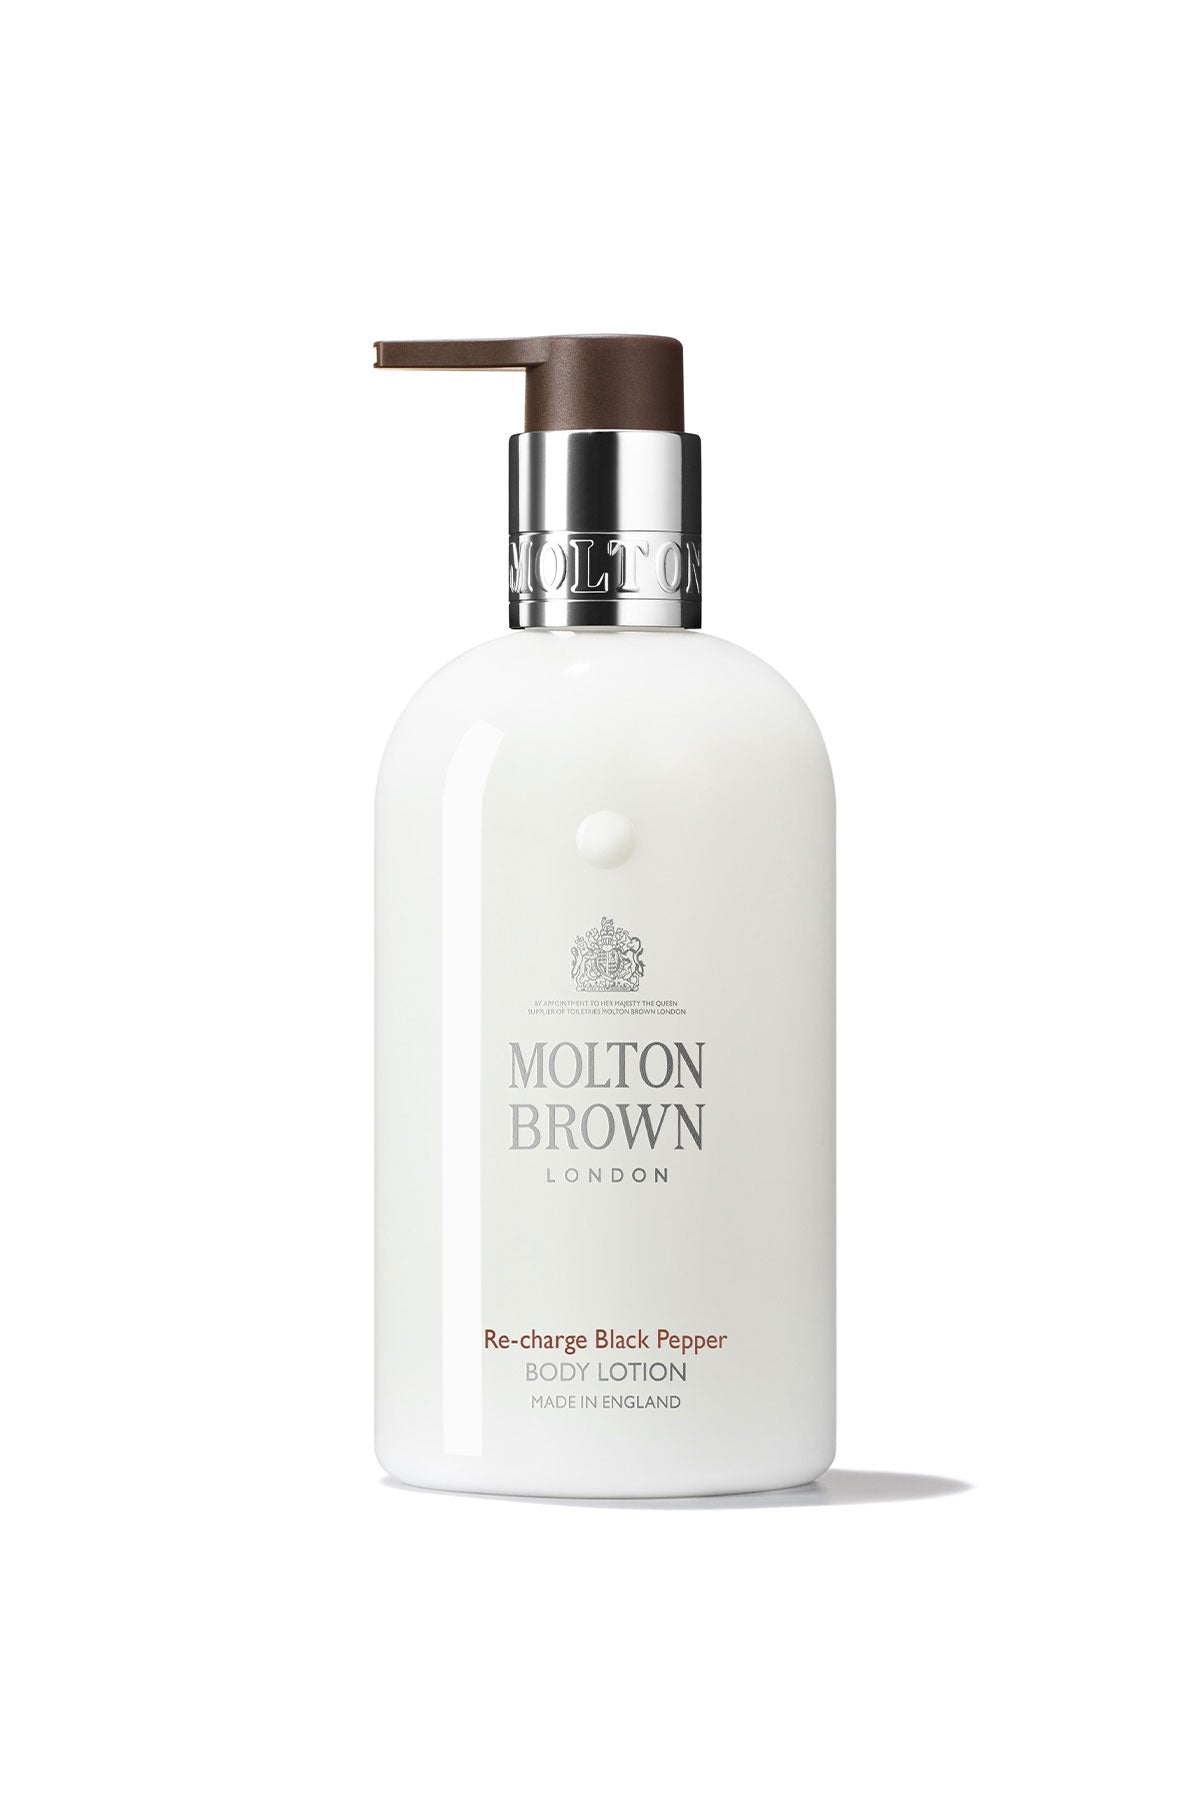 Re-charge Black Pepper Body Lotion 300ml - shop-olivia.com